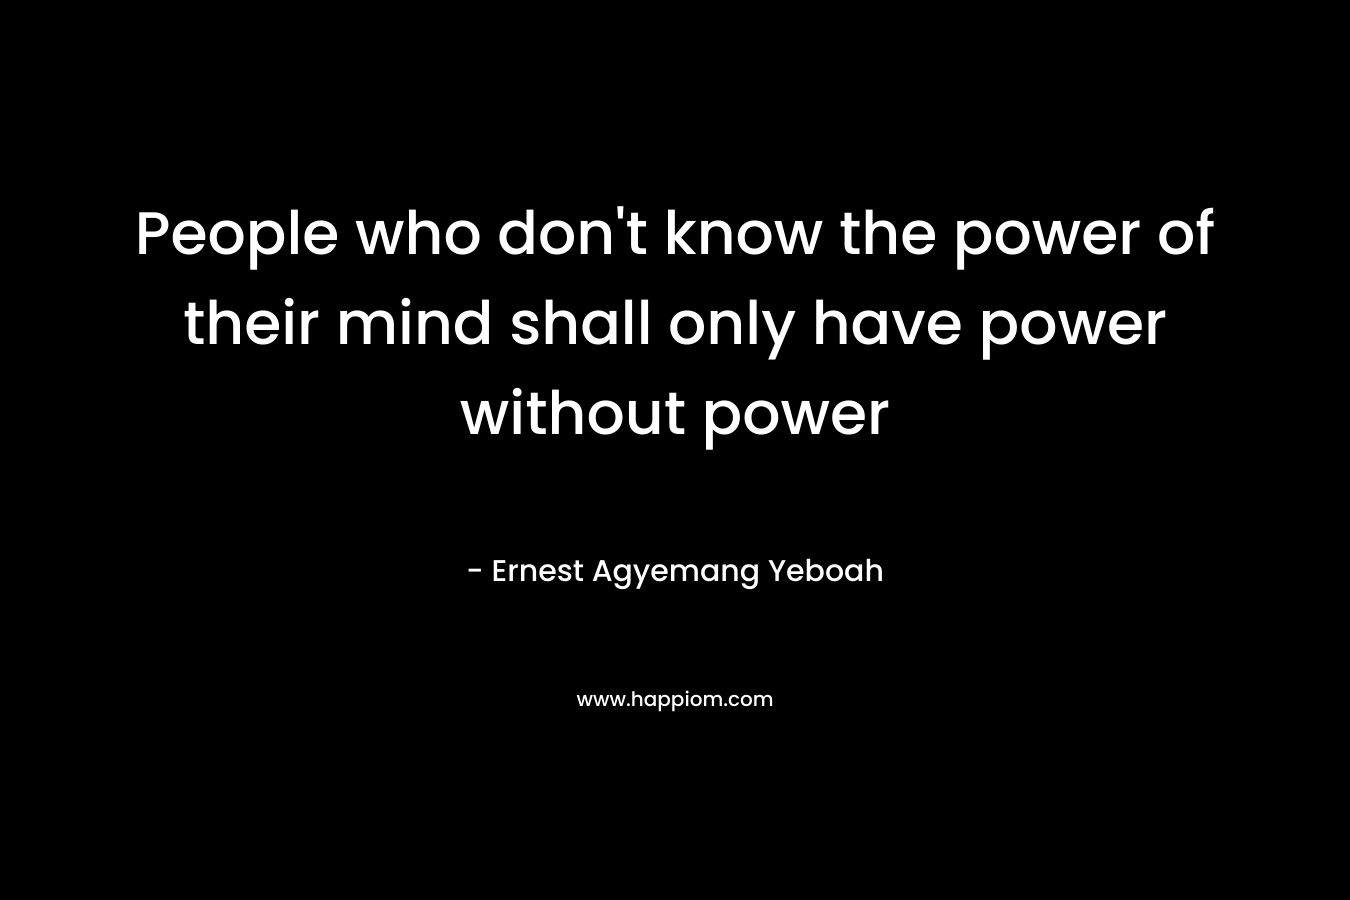 People who don't know the power of their mind shall only have power without power